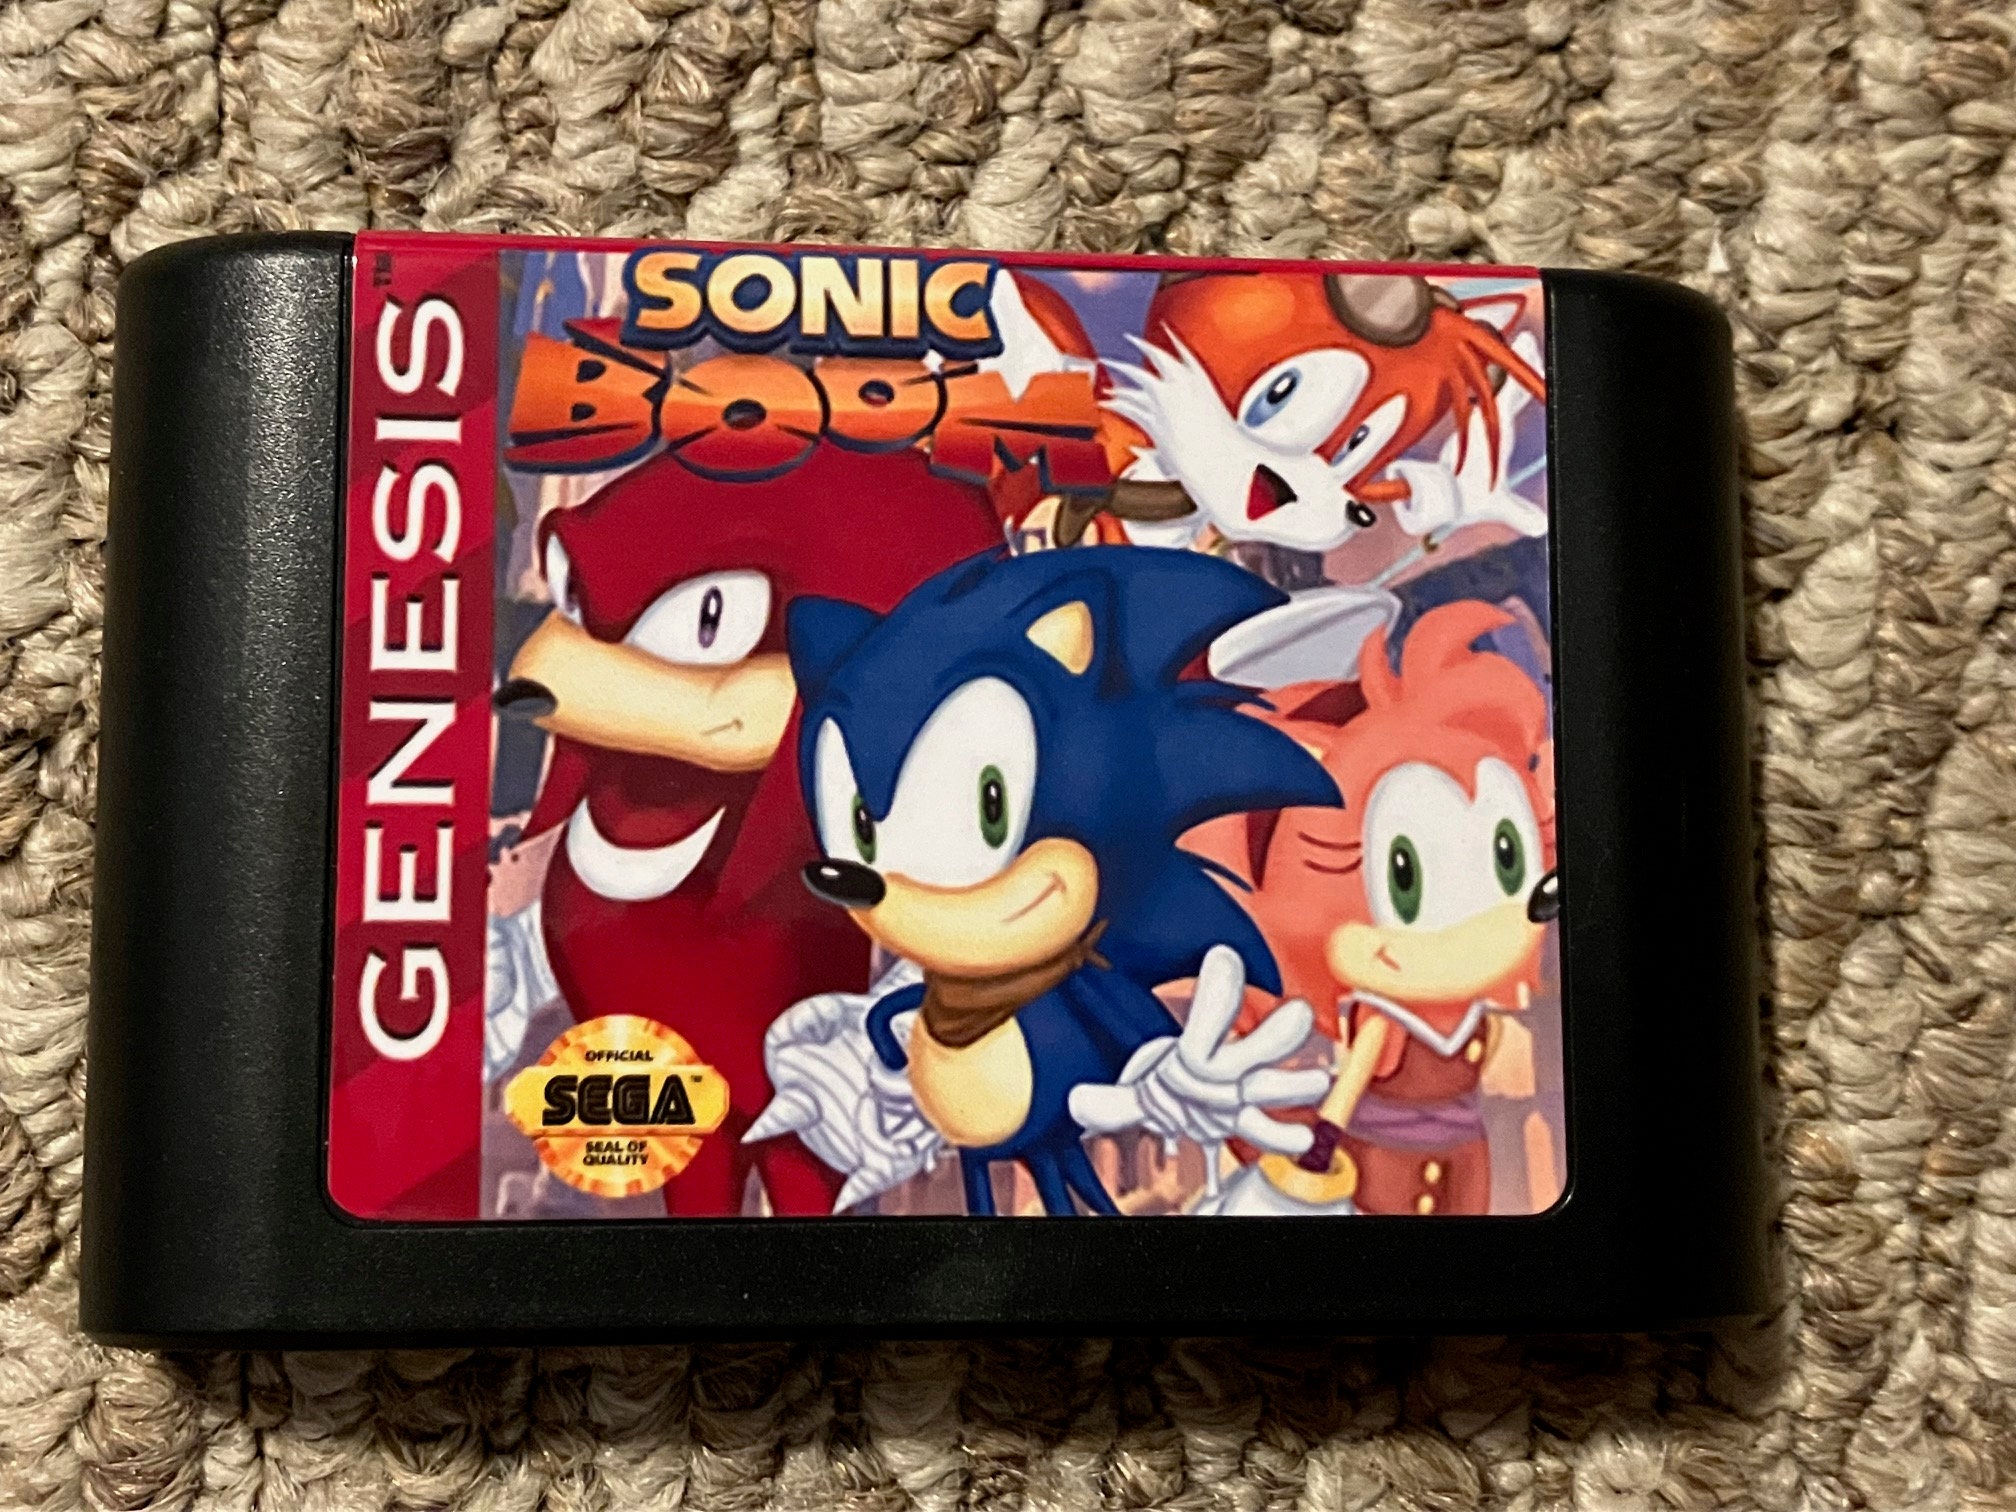 Play Sonic Classic Heroes (Sonic the Hedgehog 2 Hack) - Online Rom